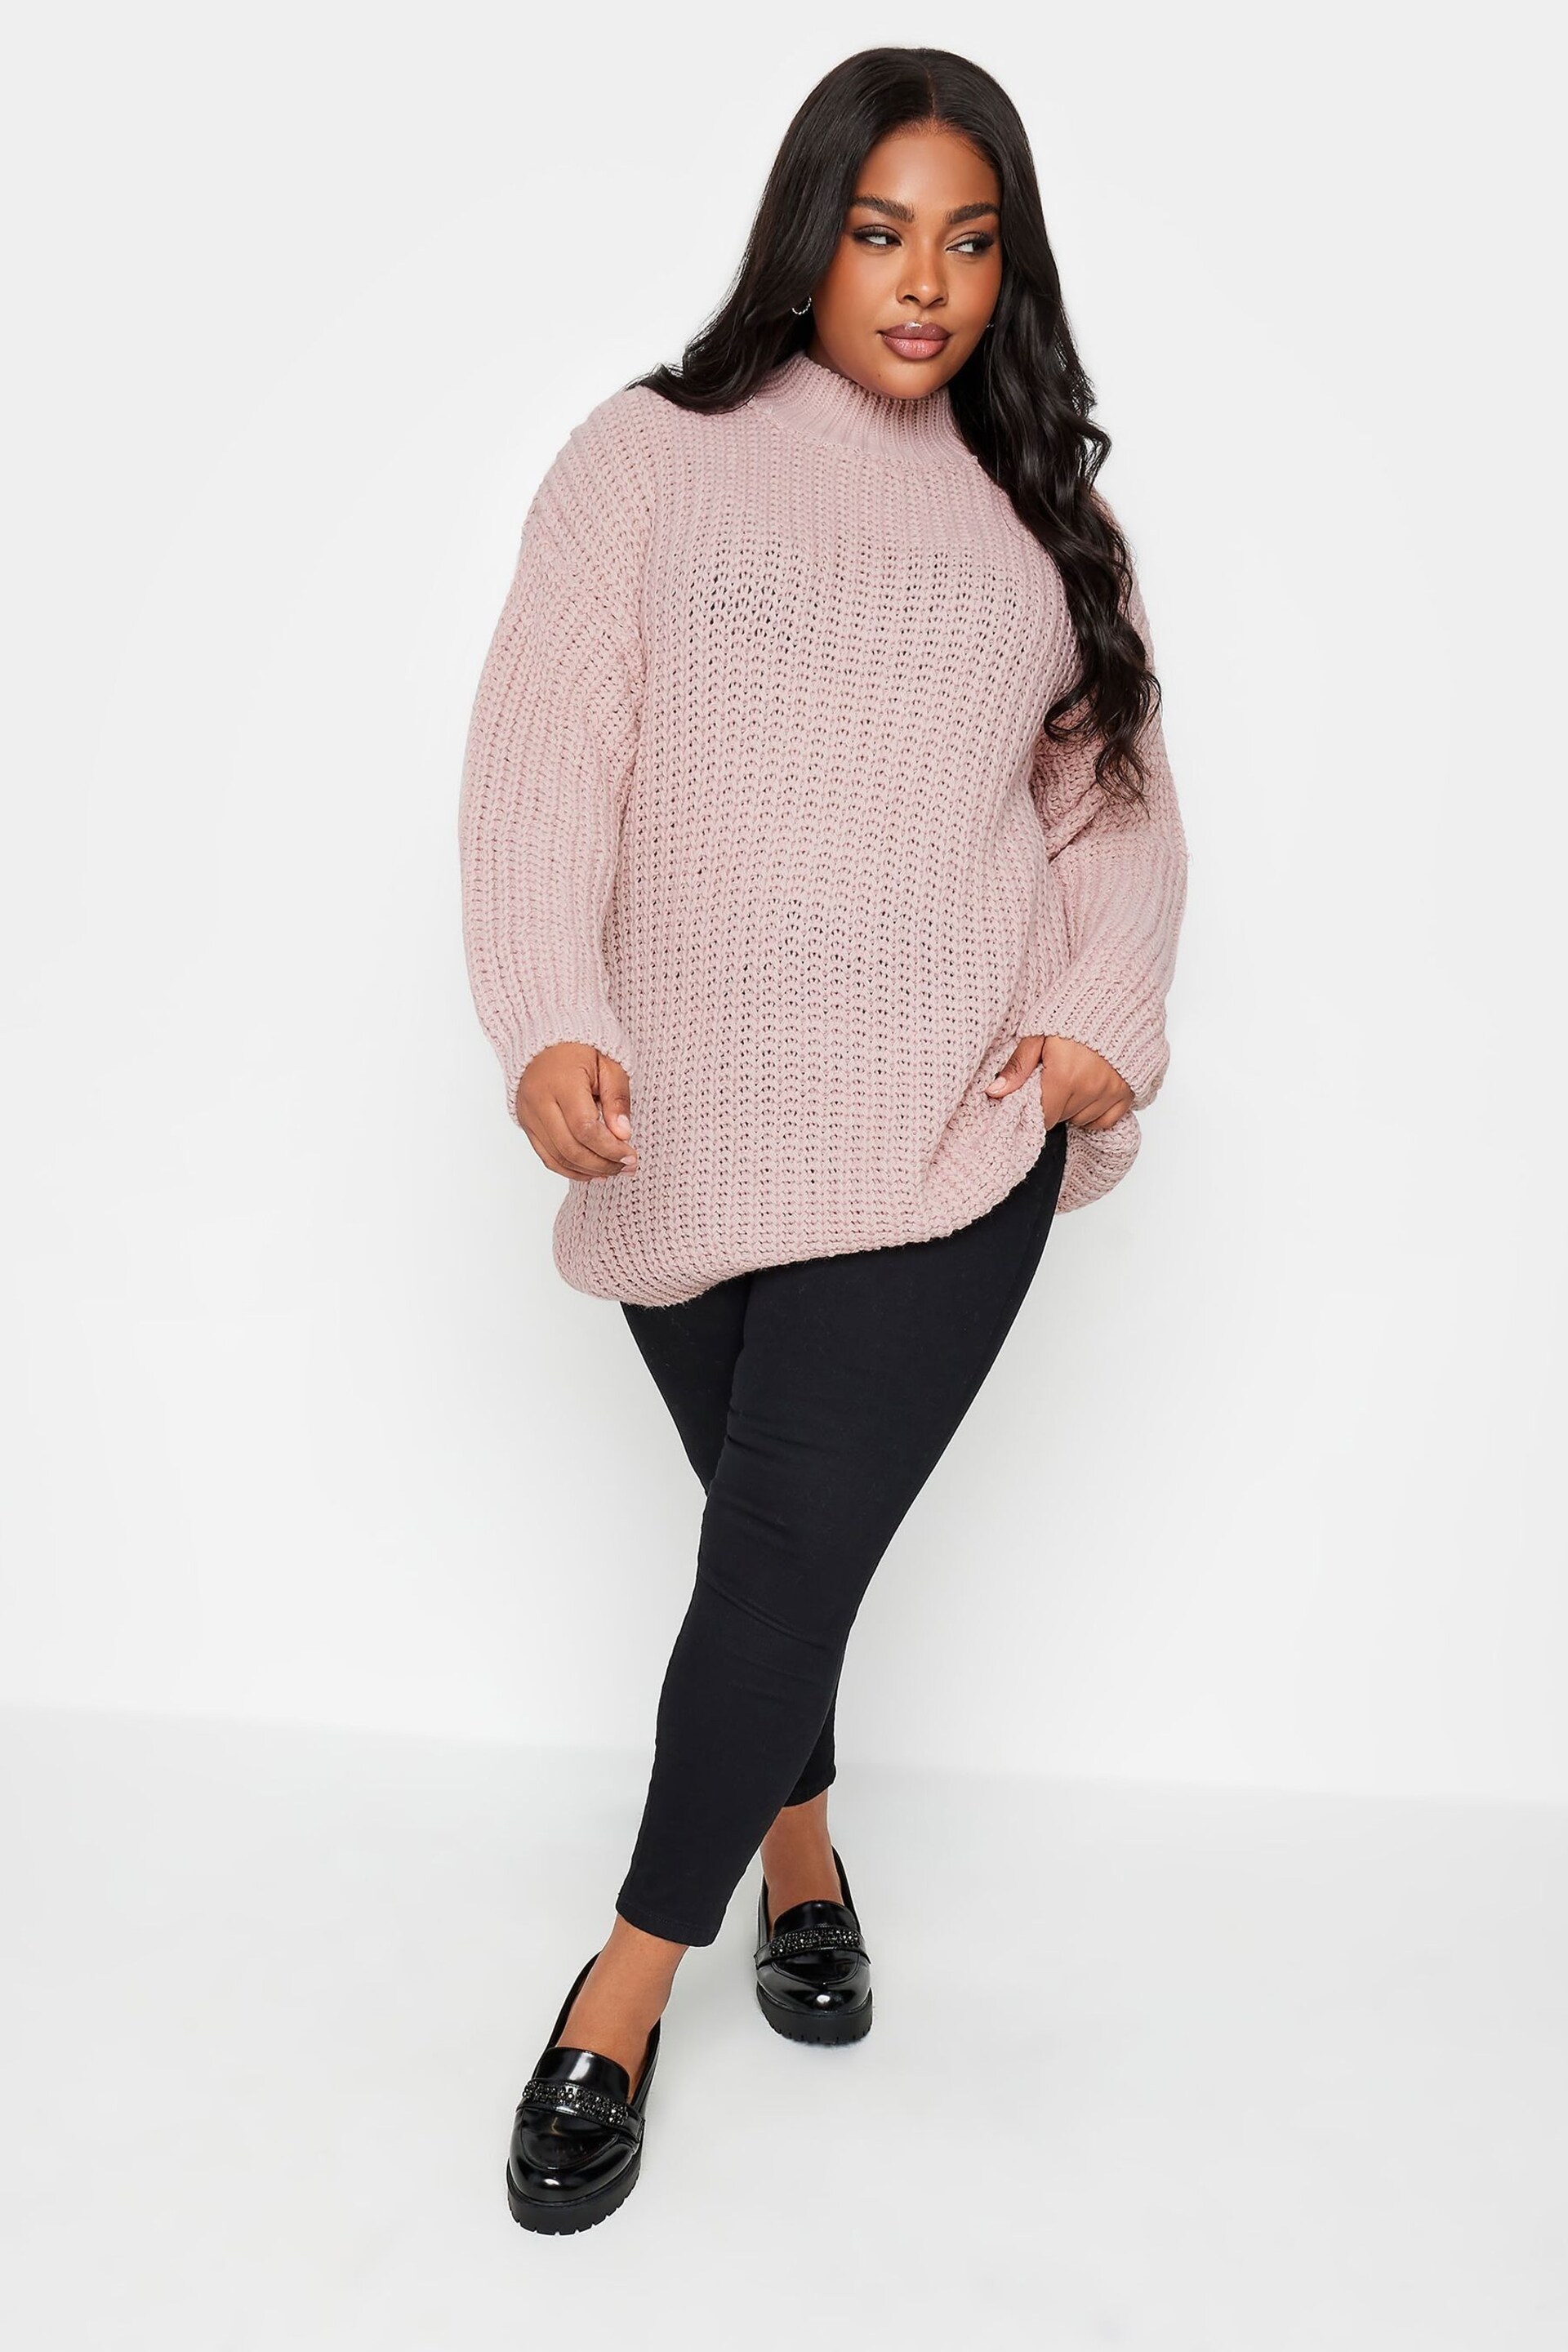 Yours Curve Pink High Neck Knitwear Jumper - Image 2 of 4